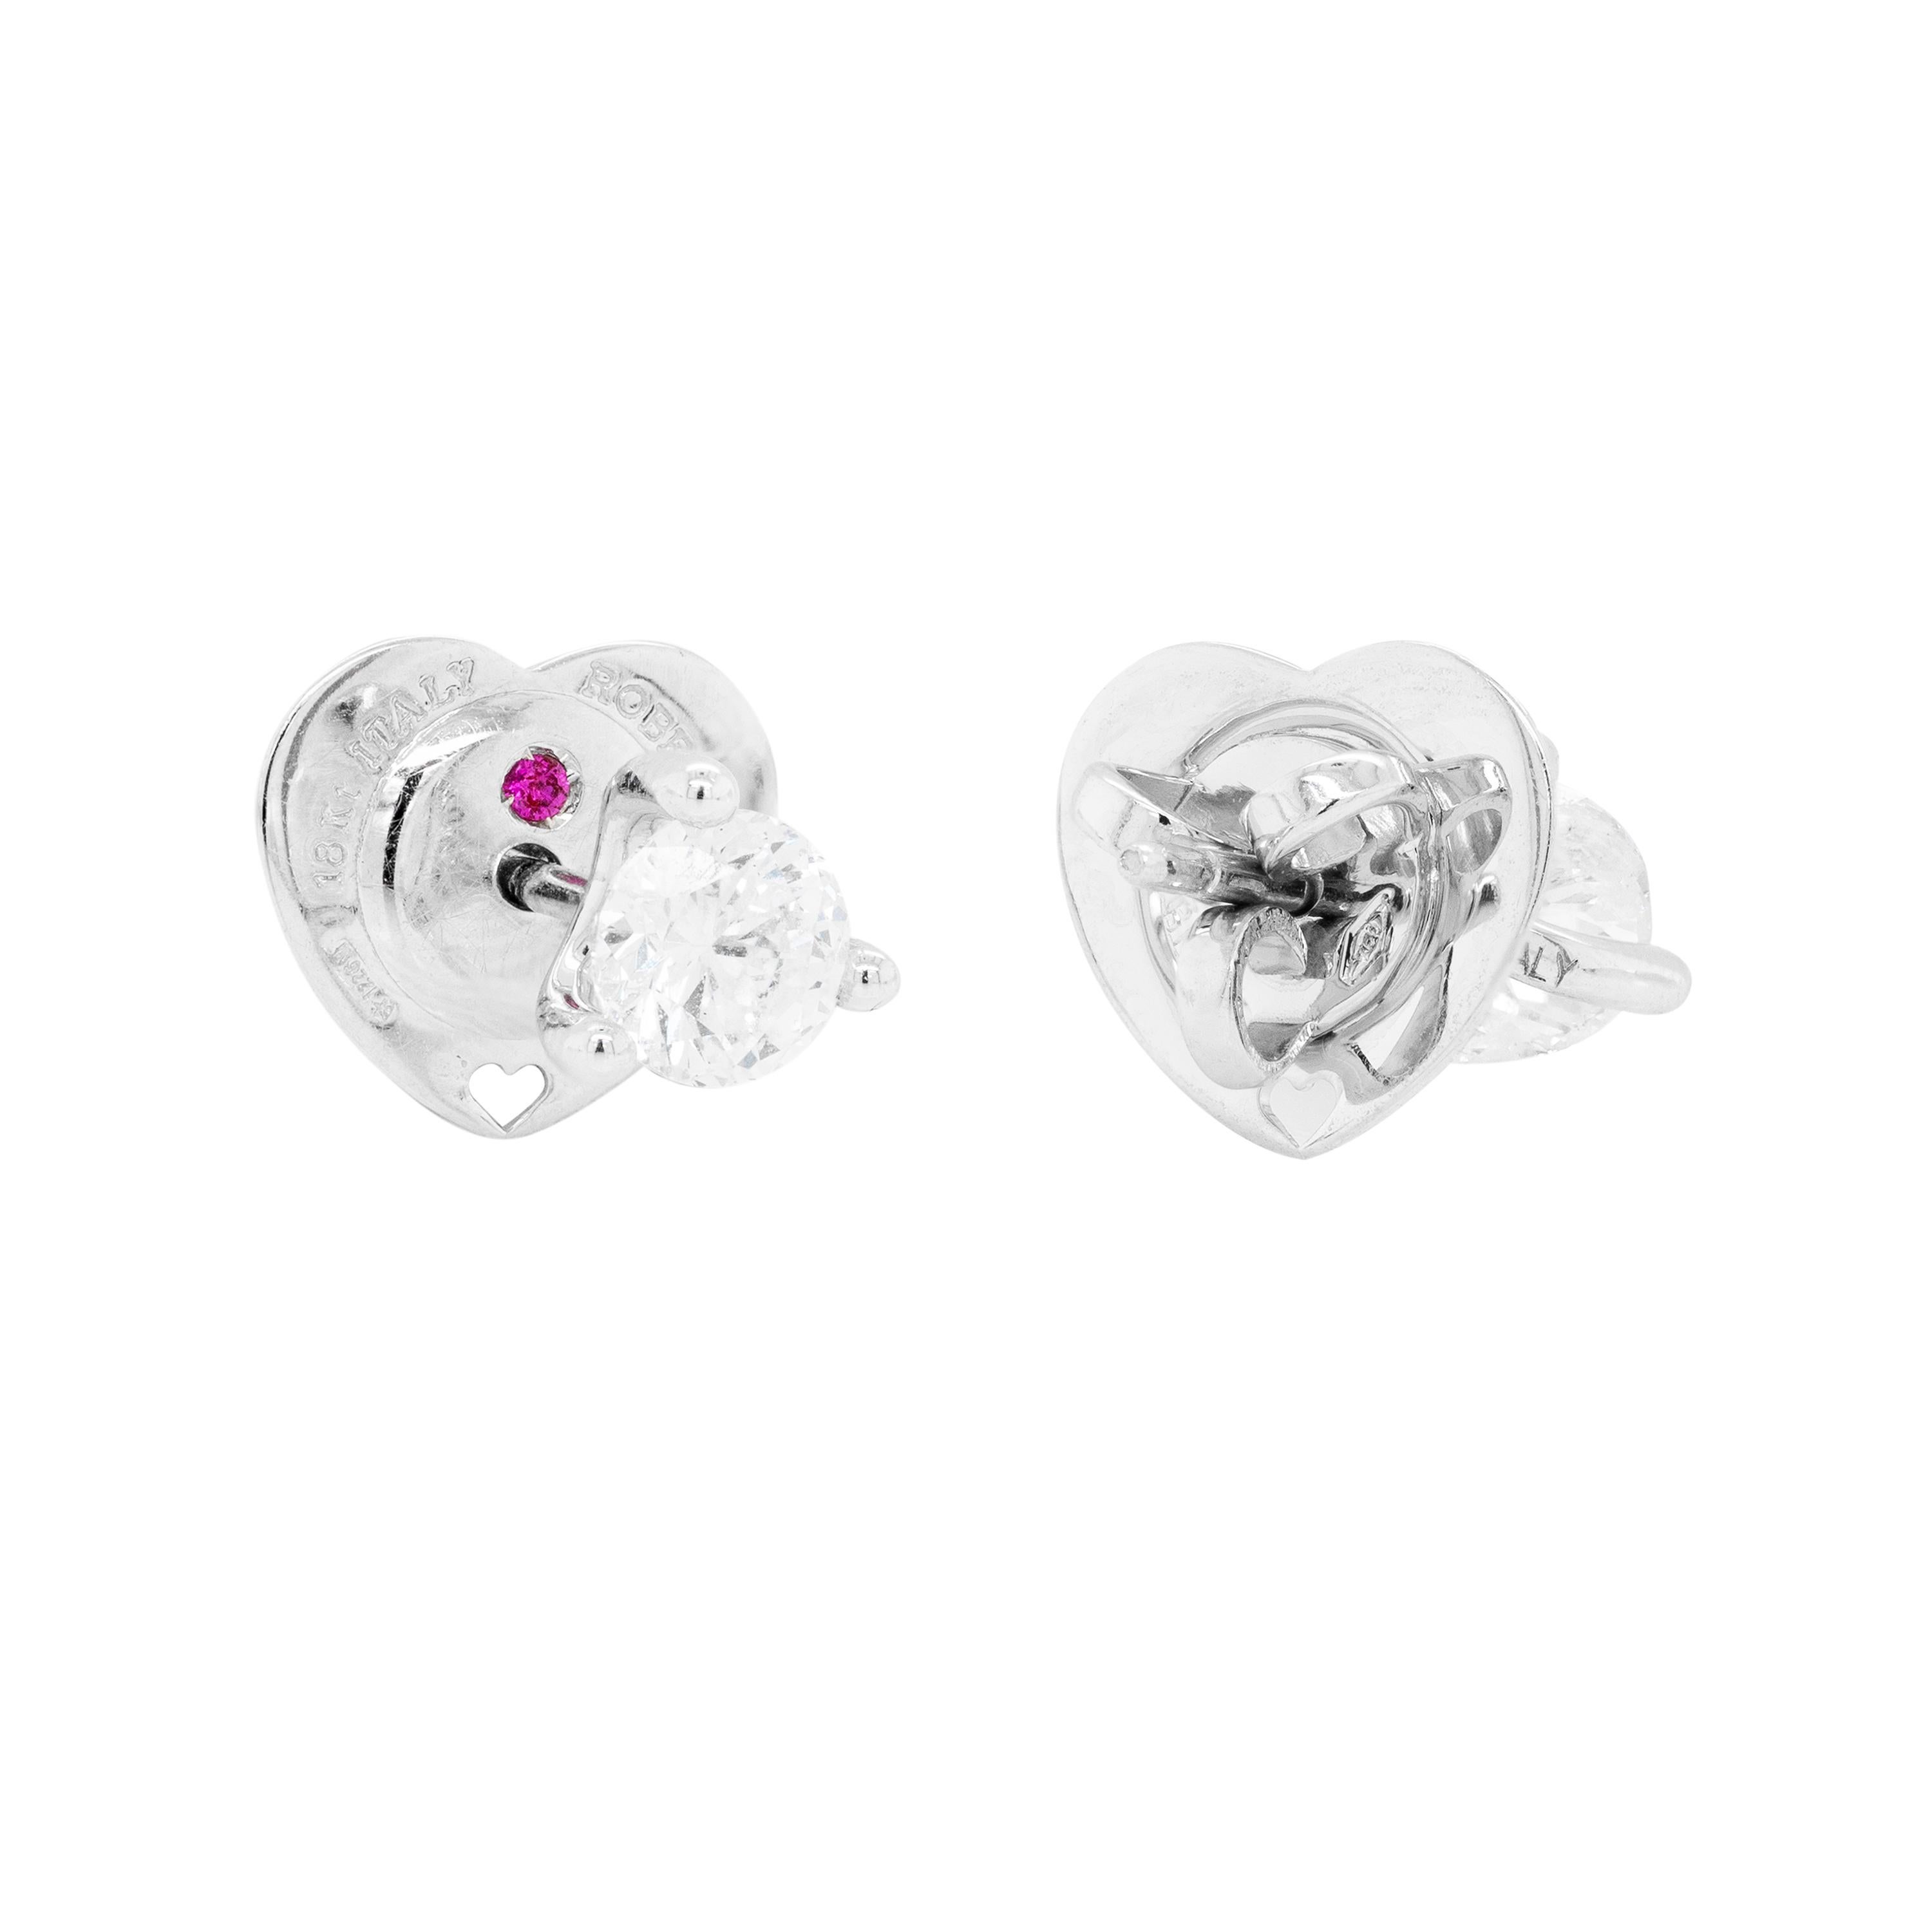 Beautiful Roberto Coin stud earrings set with their iconic Cento diamonds known for their 100 facets. Each earring is set with a certified diamond weighing 0.53 carat and is graded F in colour and VS1 in clarity, each held in an 18 carat white gold